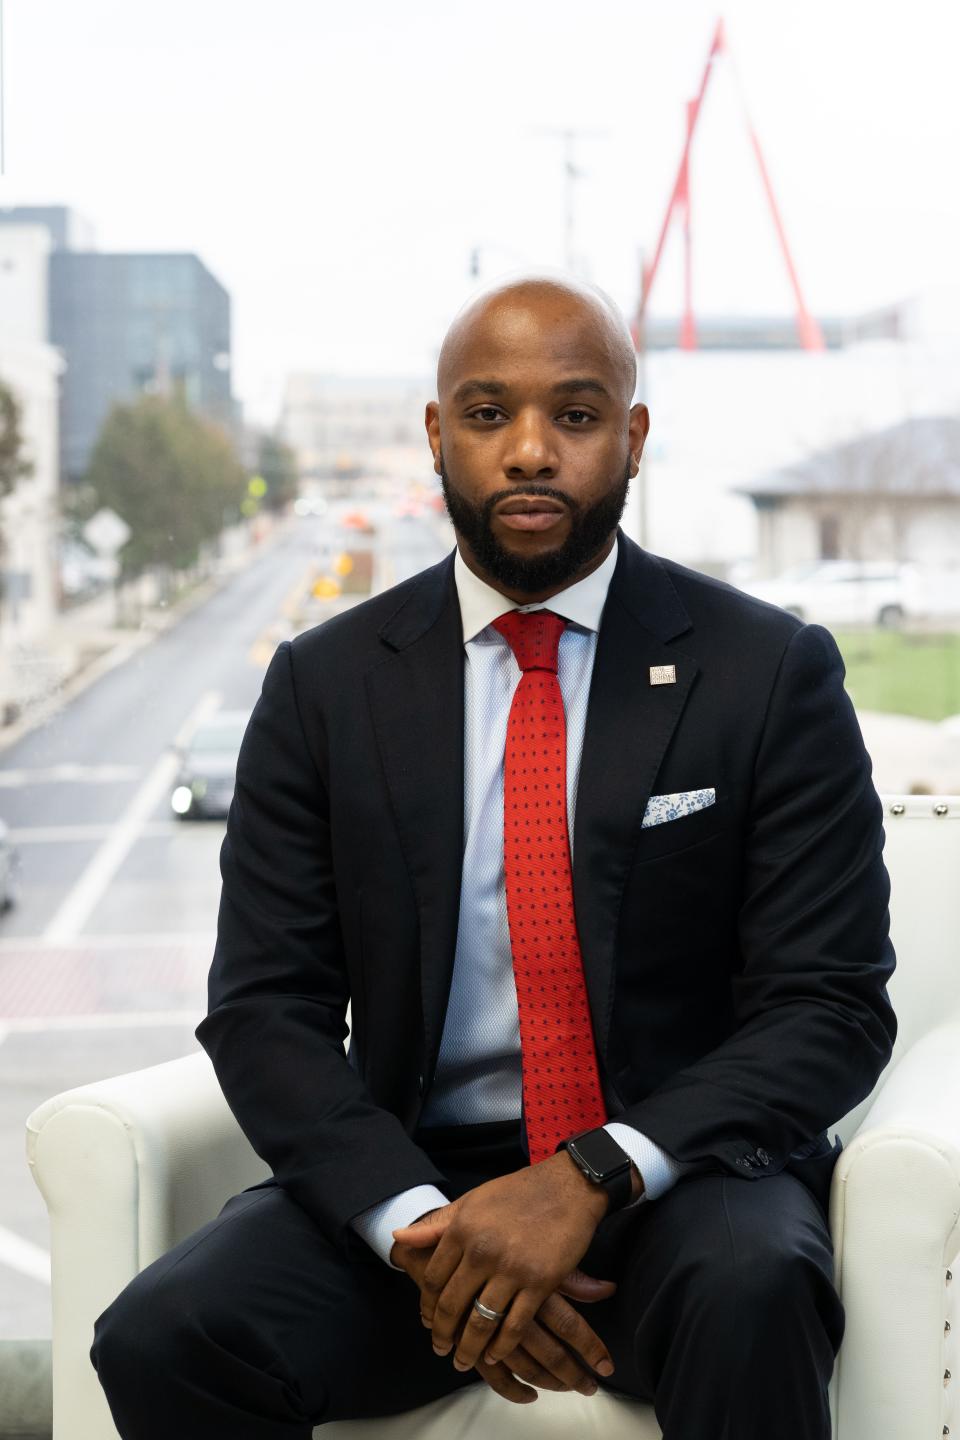 Columbus civil rights attorney Sean Walton Jr. is a leader of the Columbus Police Accountability Project. His clients have included family members of people killed by police and police officers who have themselves experienced discrimination.